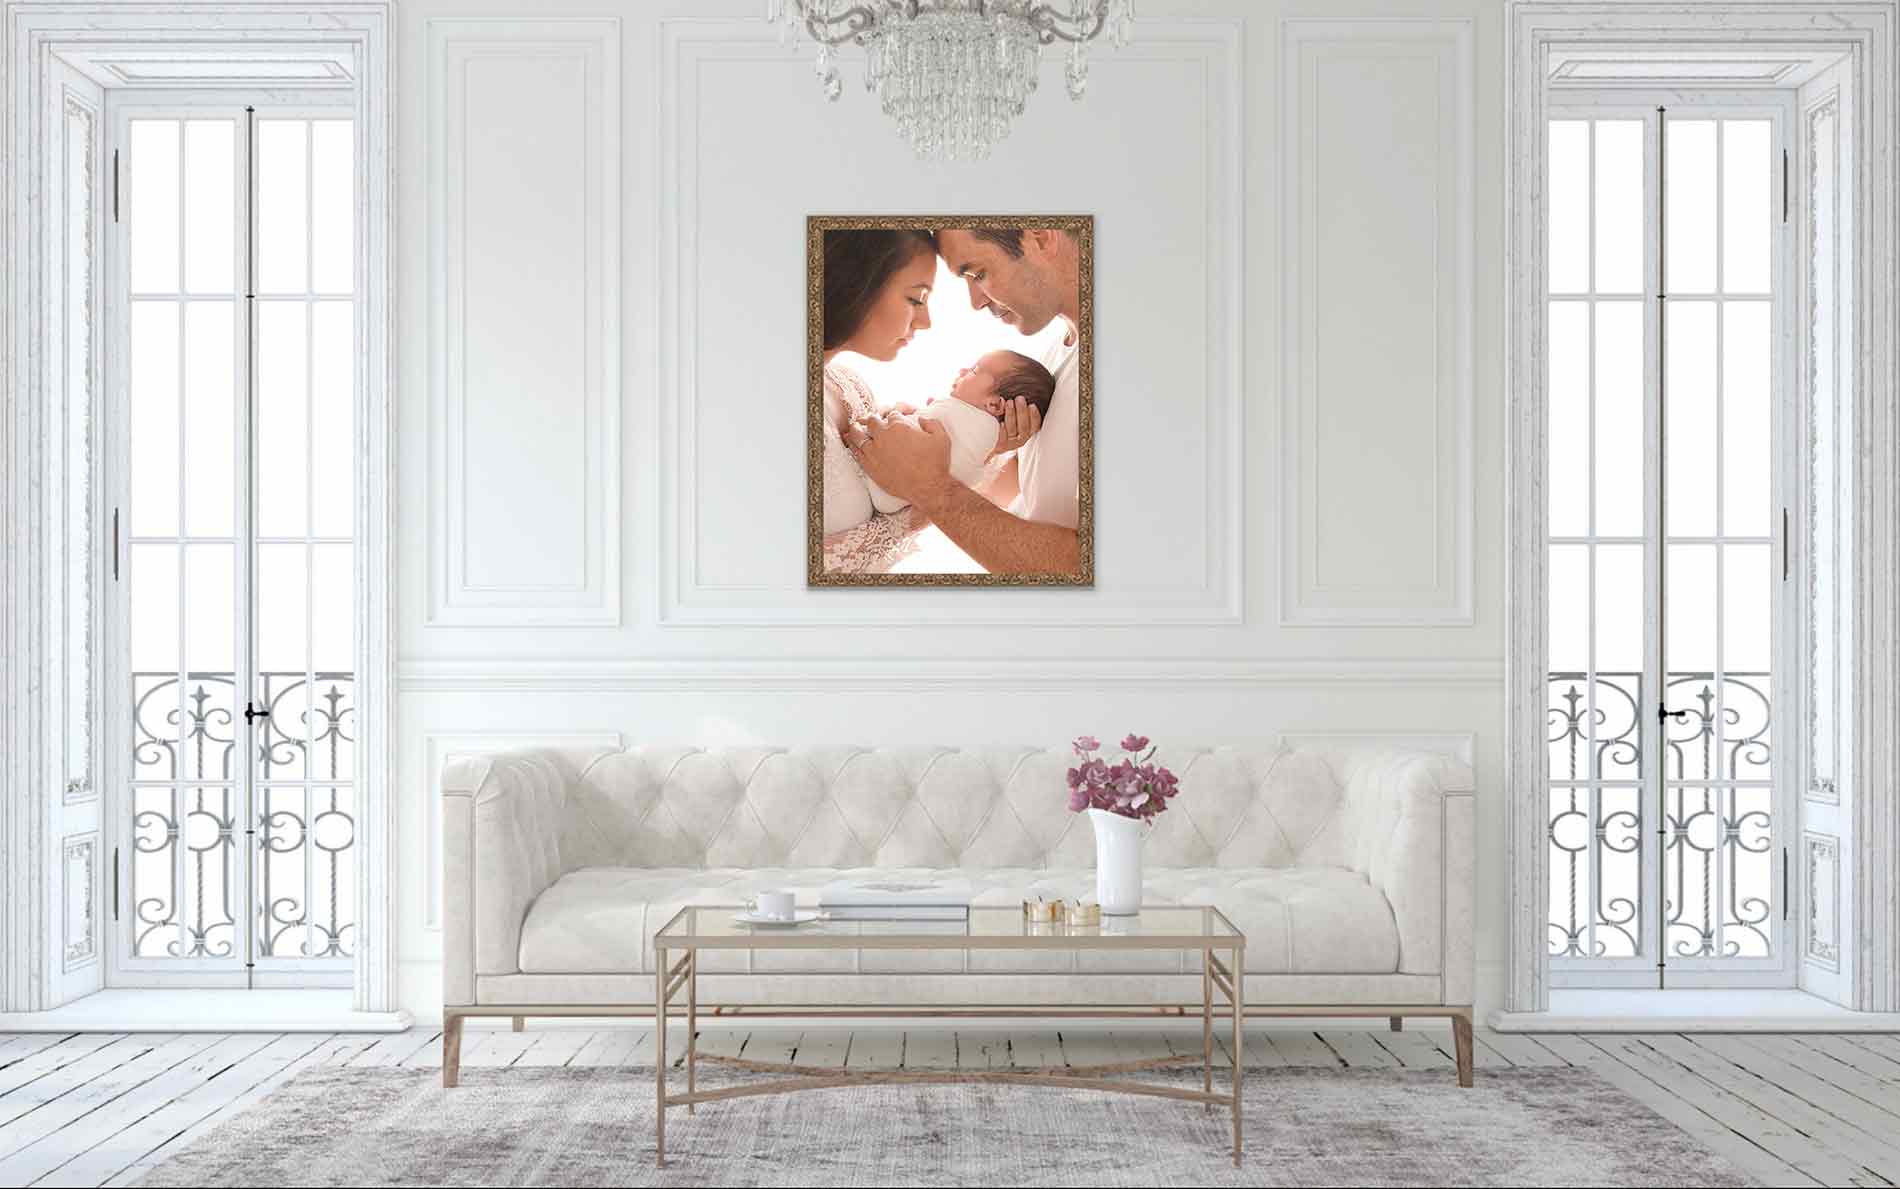 Wall art with a newborn photo in a living room setting